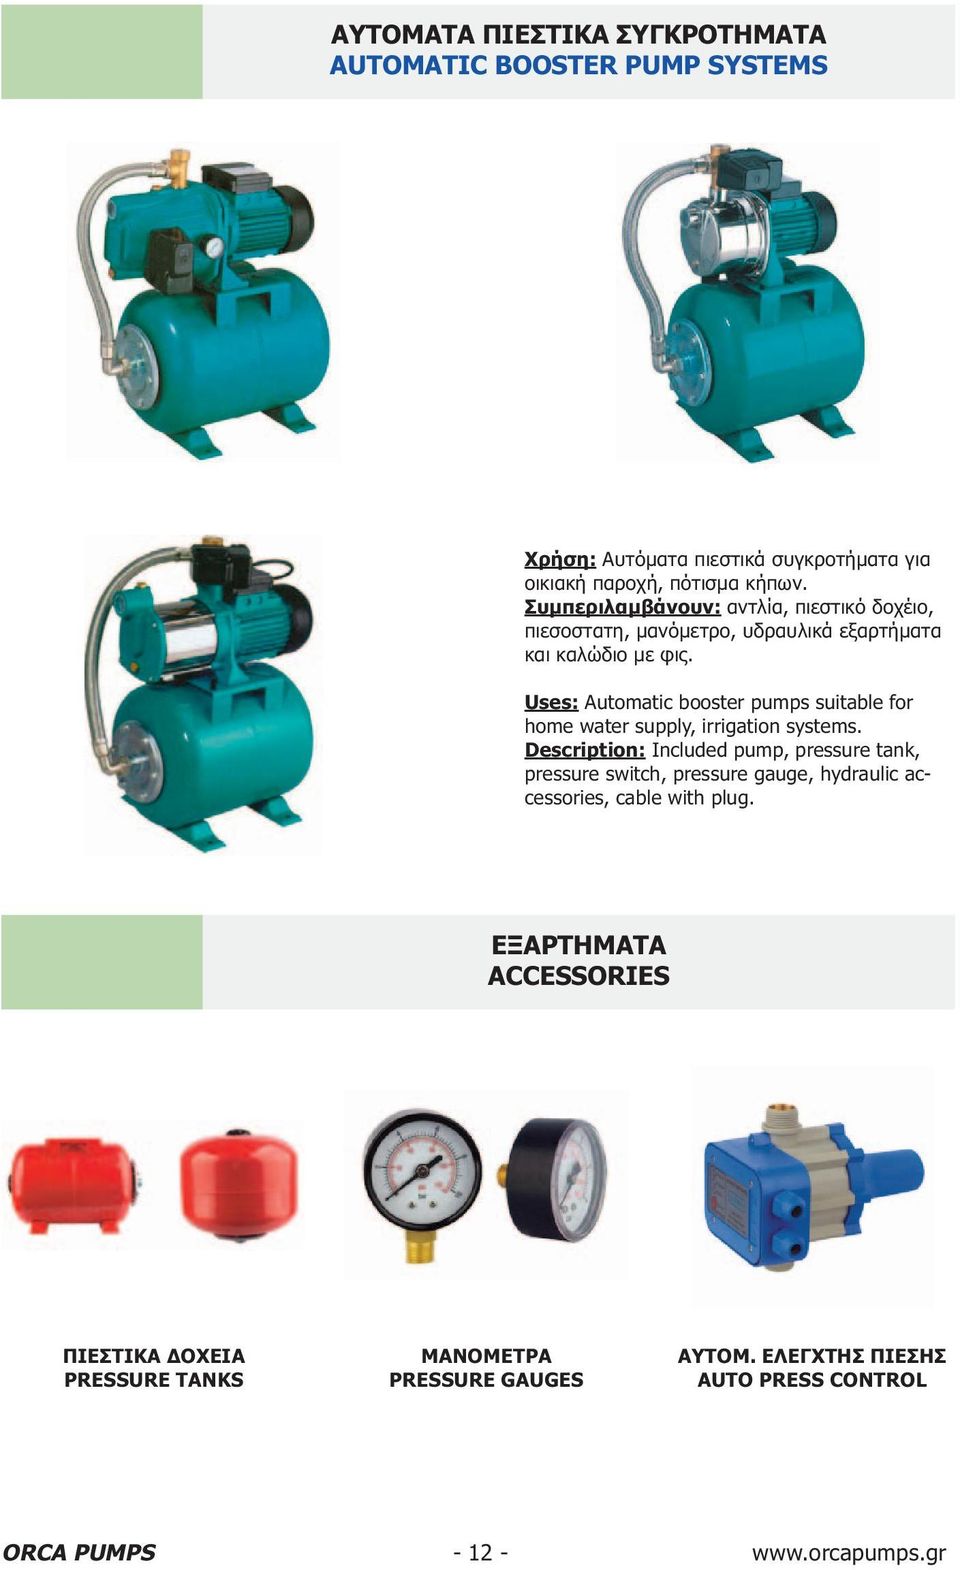 Uses: Automatic booster pumps suitable for home water supply, irrigation systems.